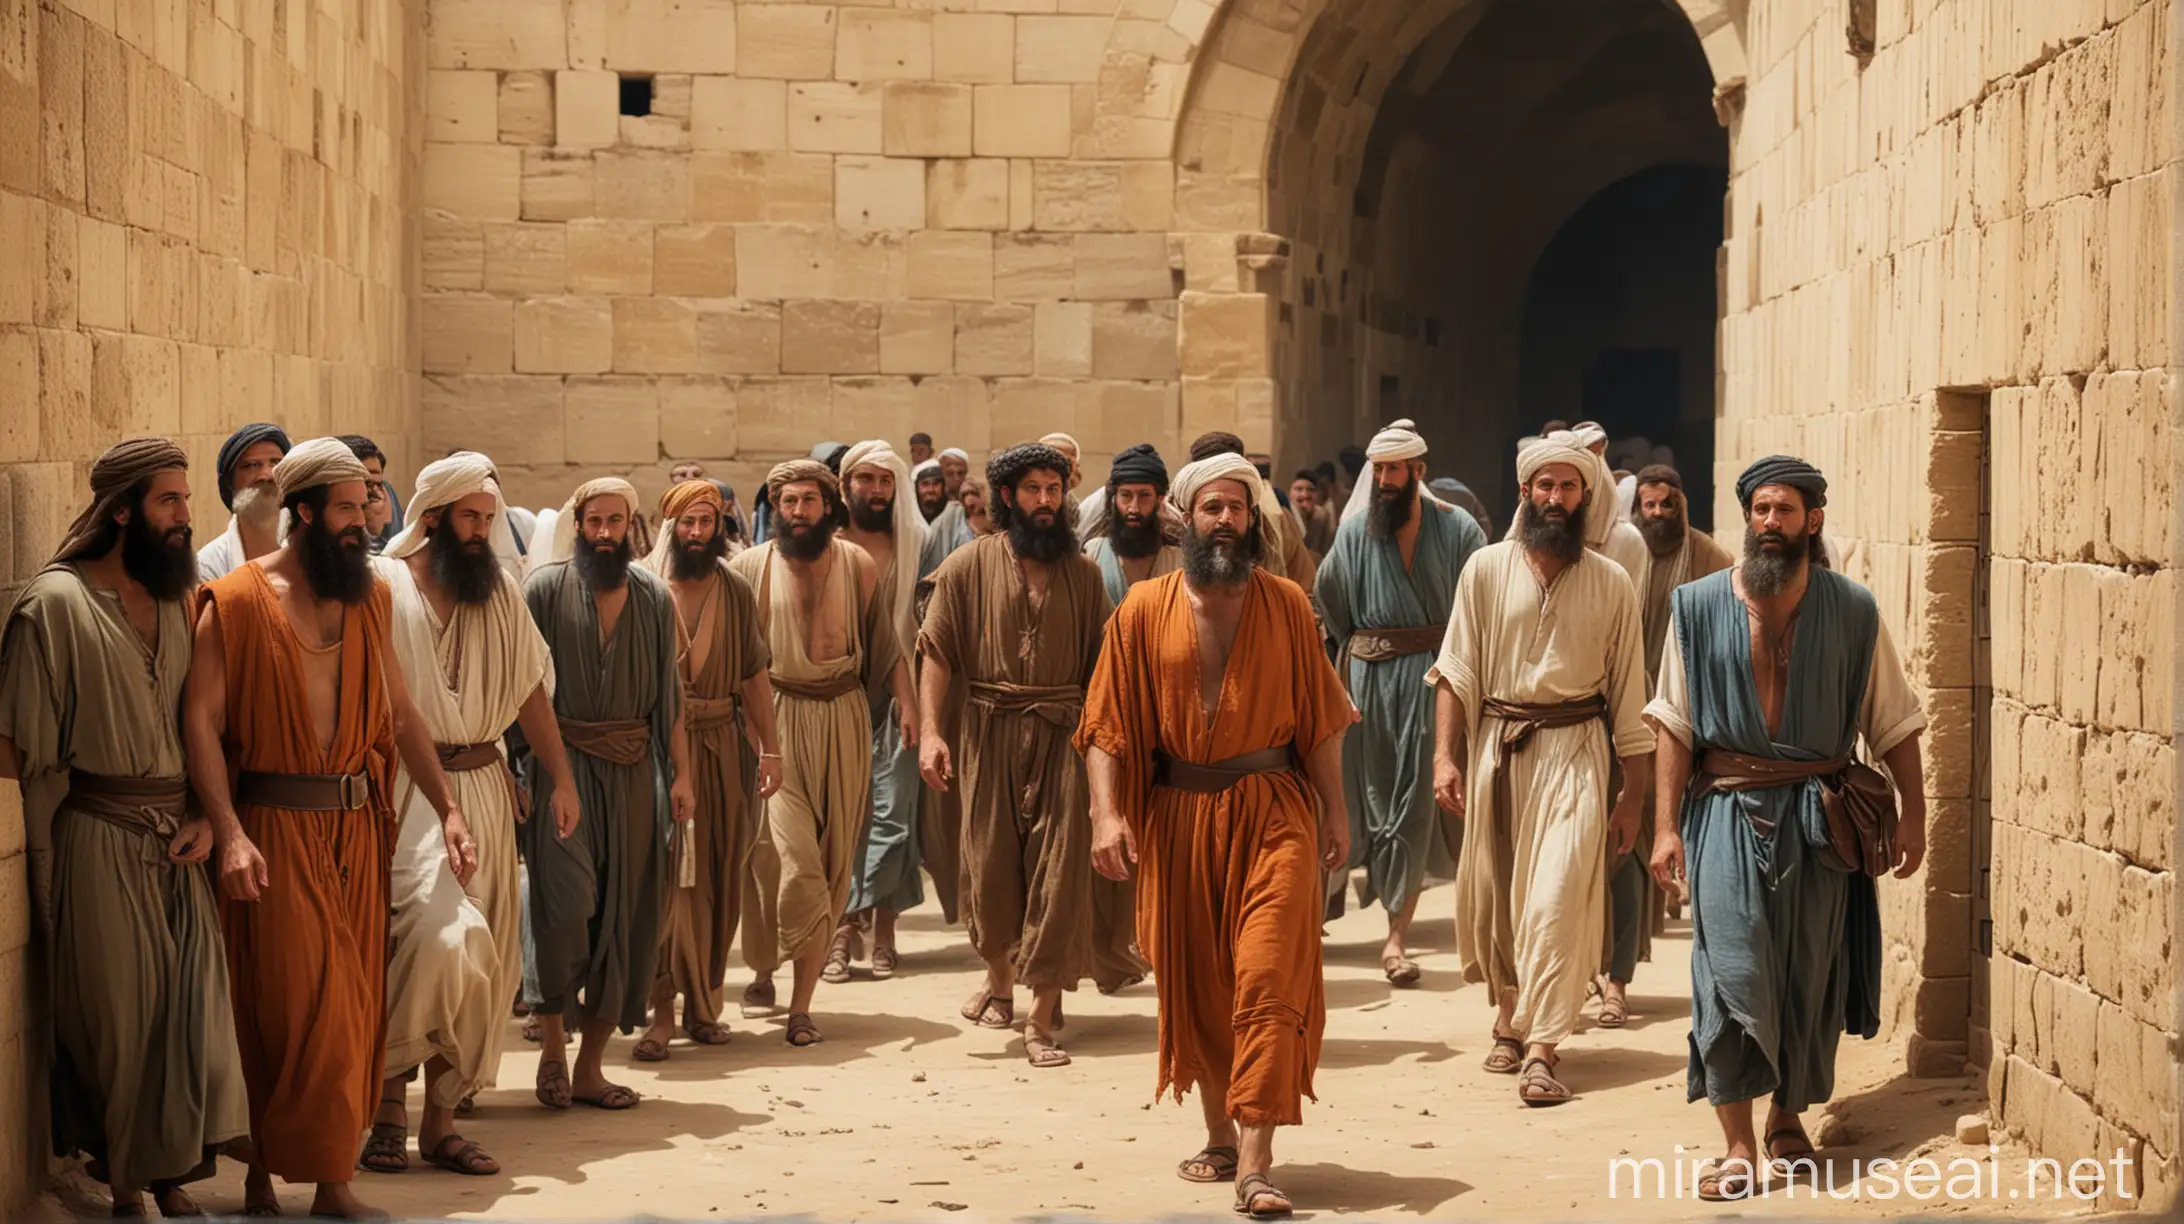 about 8 jewish men in a prison the Middle East, during the biblical era of Moses